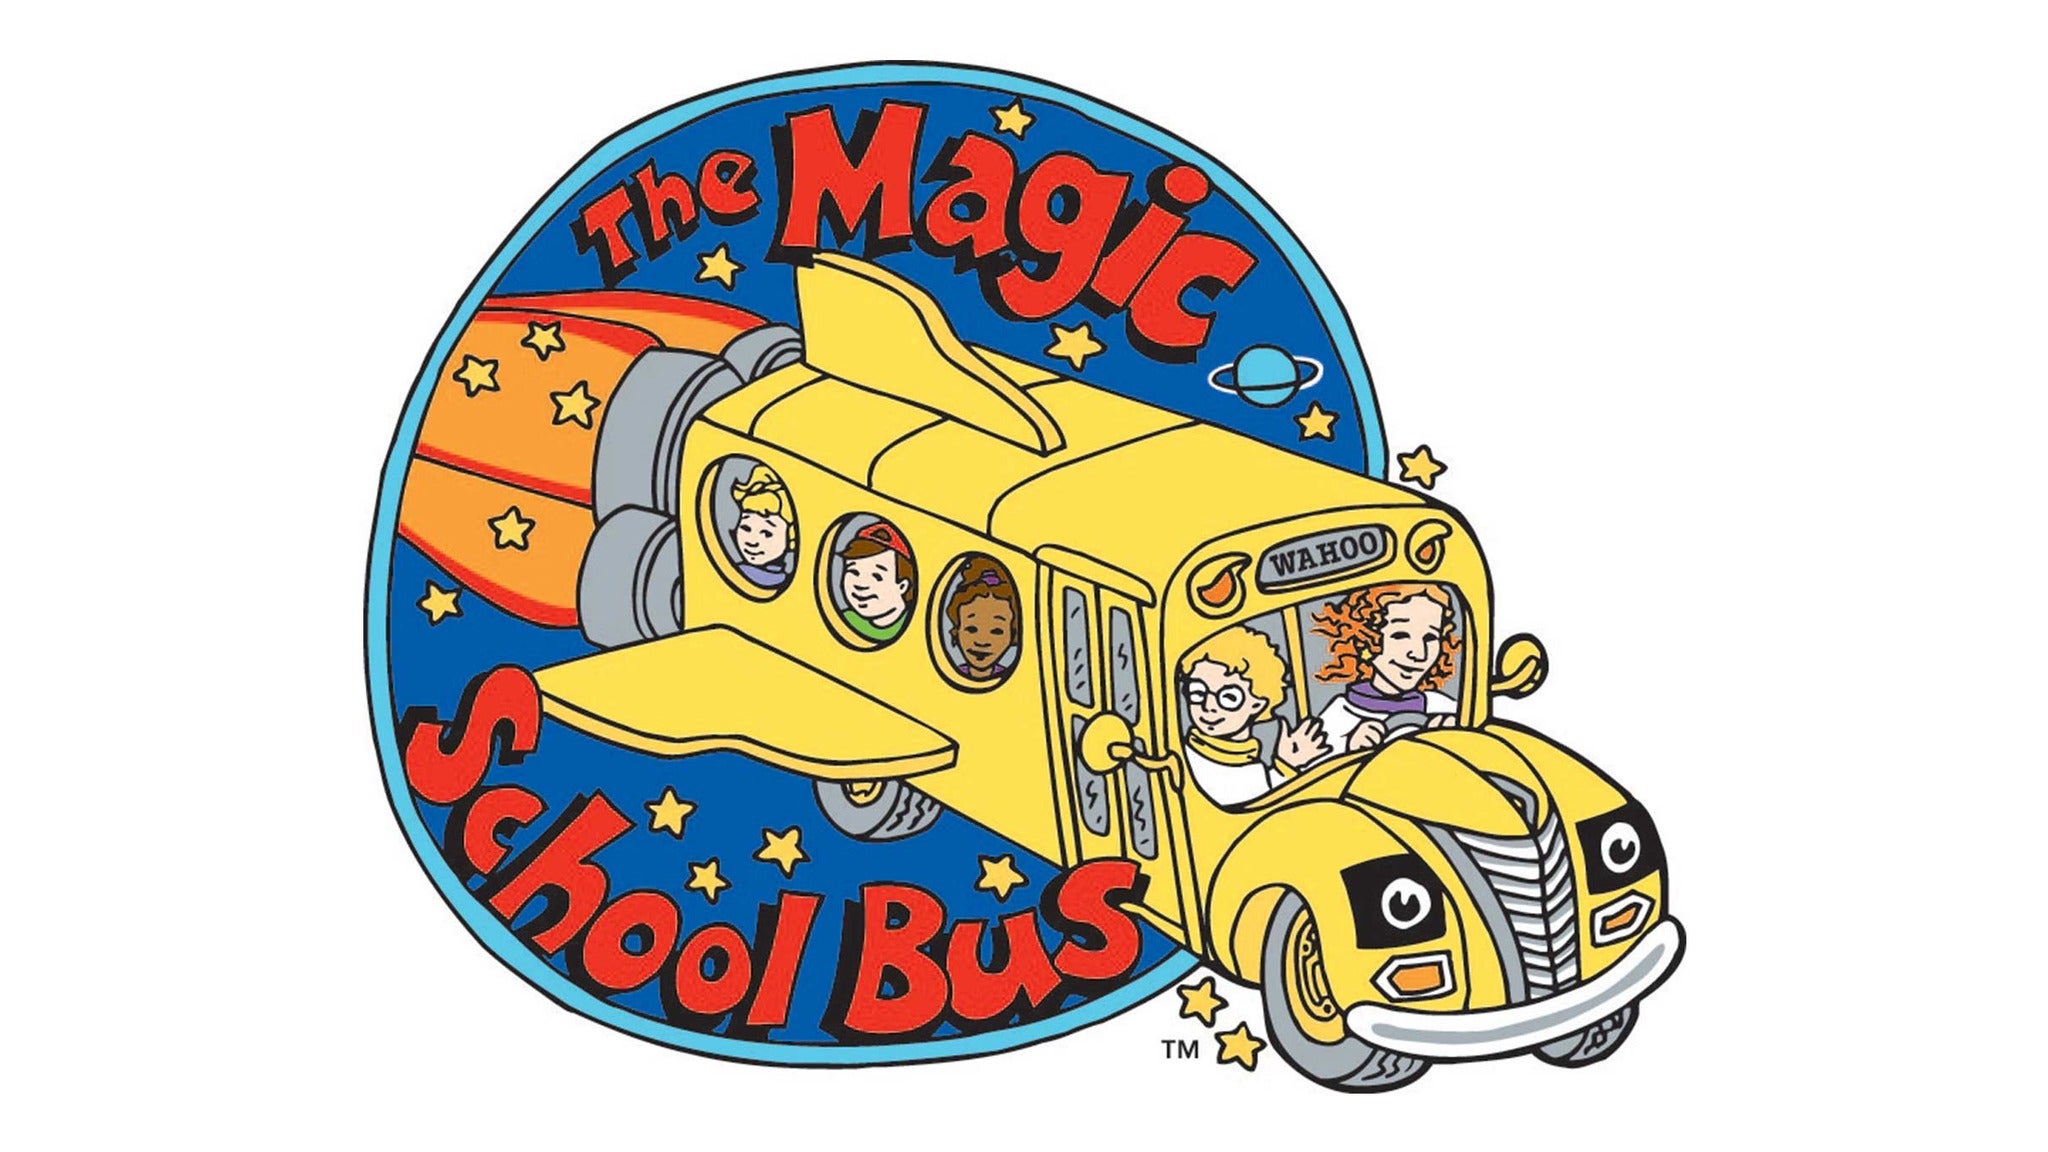 The Magic School Bus Wallpapers